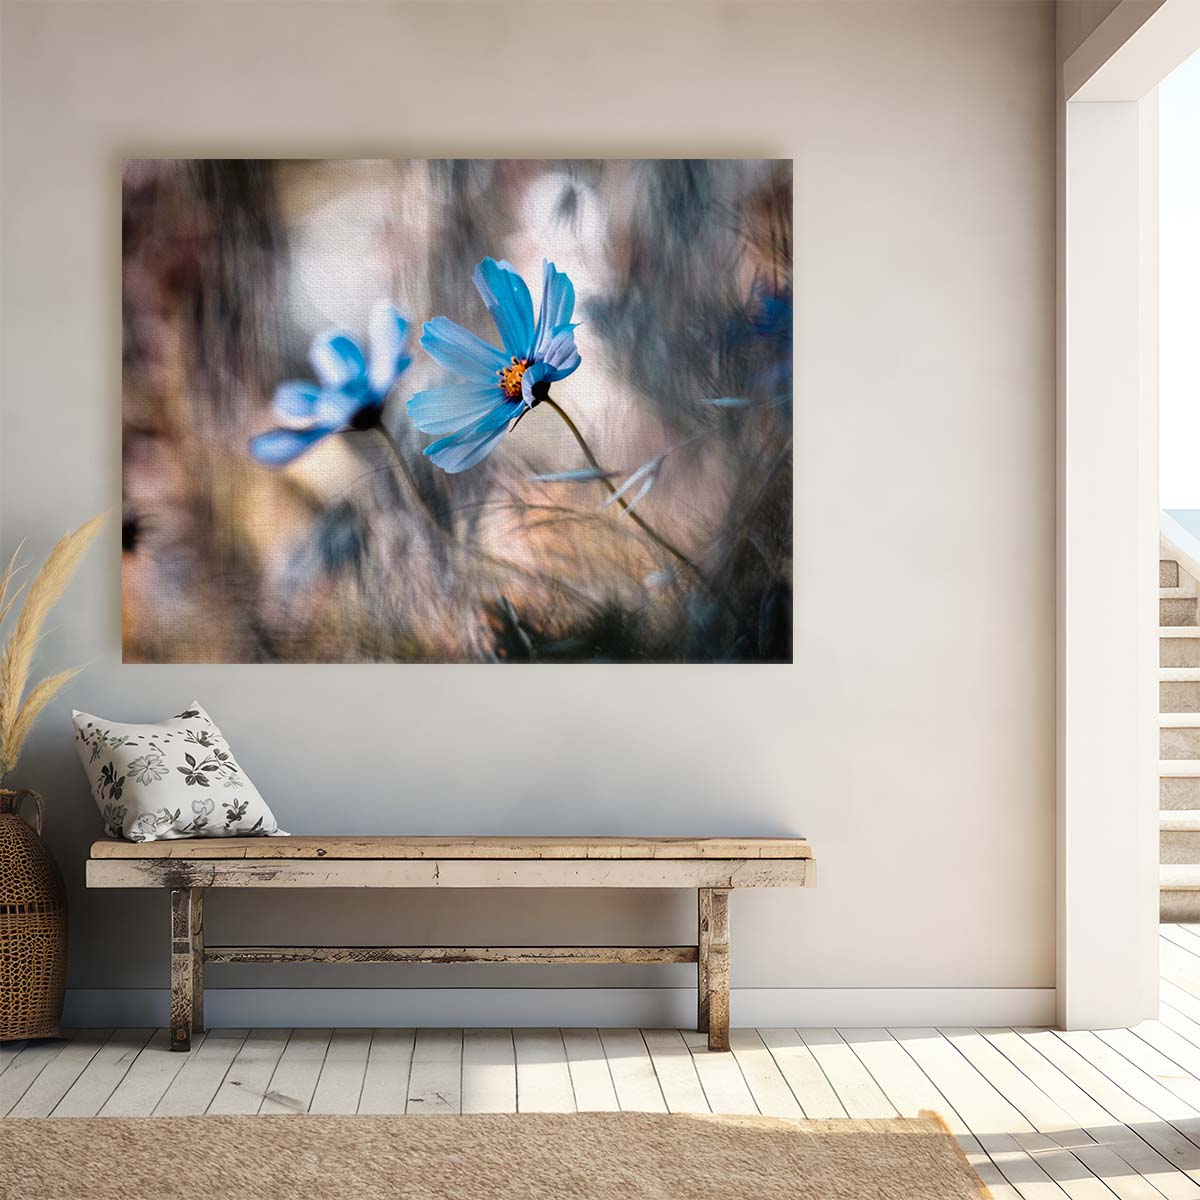 Blue Cosmos Flower Duo Macro Bokeh Wall Art by Luxuriance Designs. Made in USA.